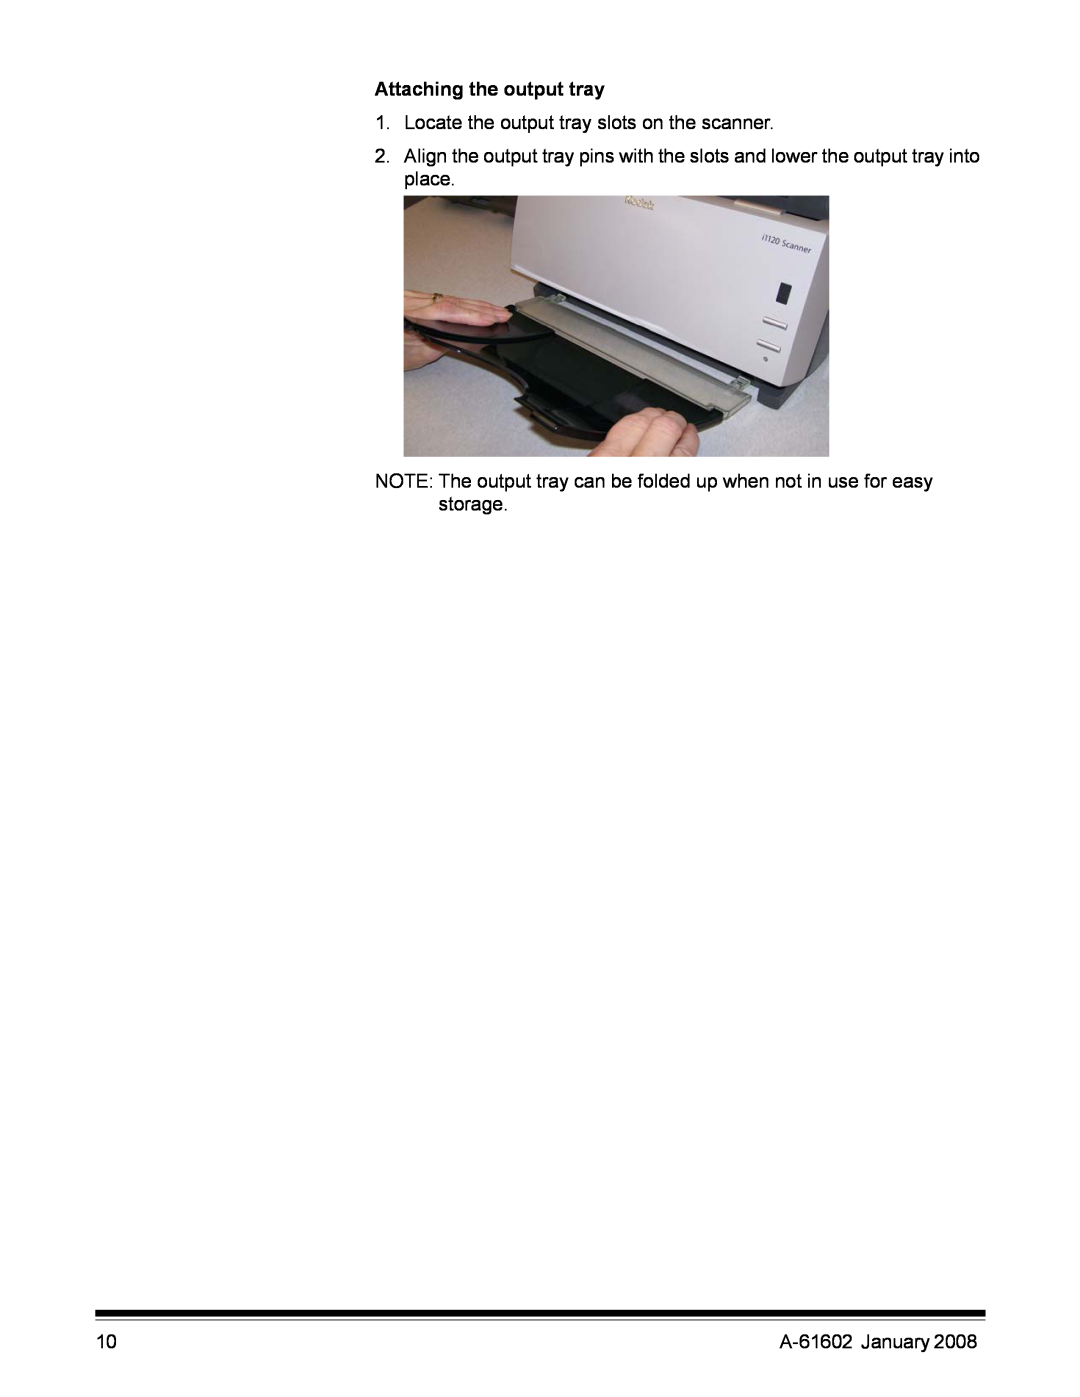 Kodak manual Attaching the output tray, Locate the output tray slots on the scanner, A-61602 January 